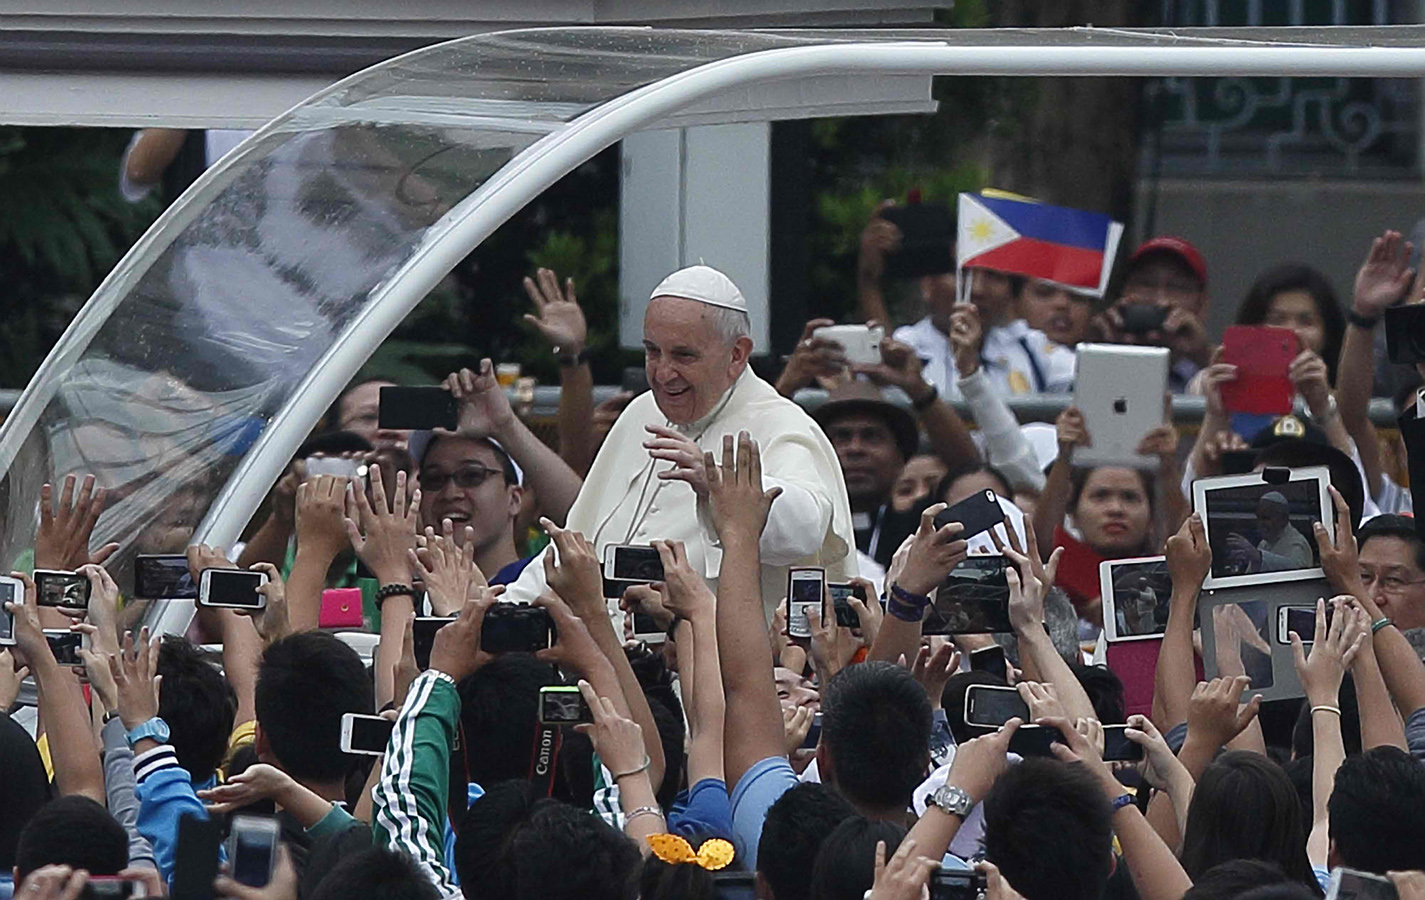 Pope Francis meets young people at the University of Santo Tomas in Manila, Jan. 18, 2015. PAUL HARING/CNS